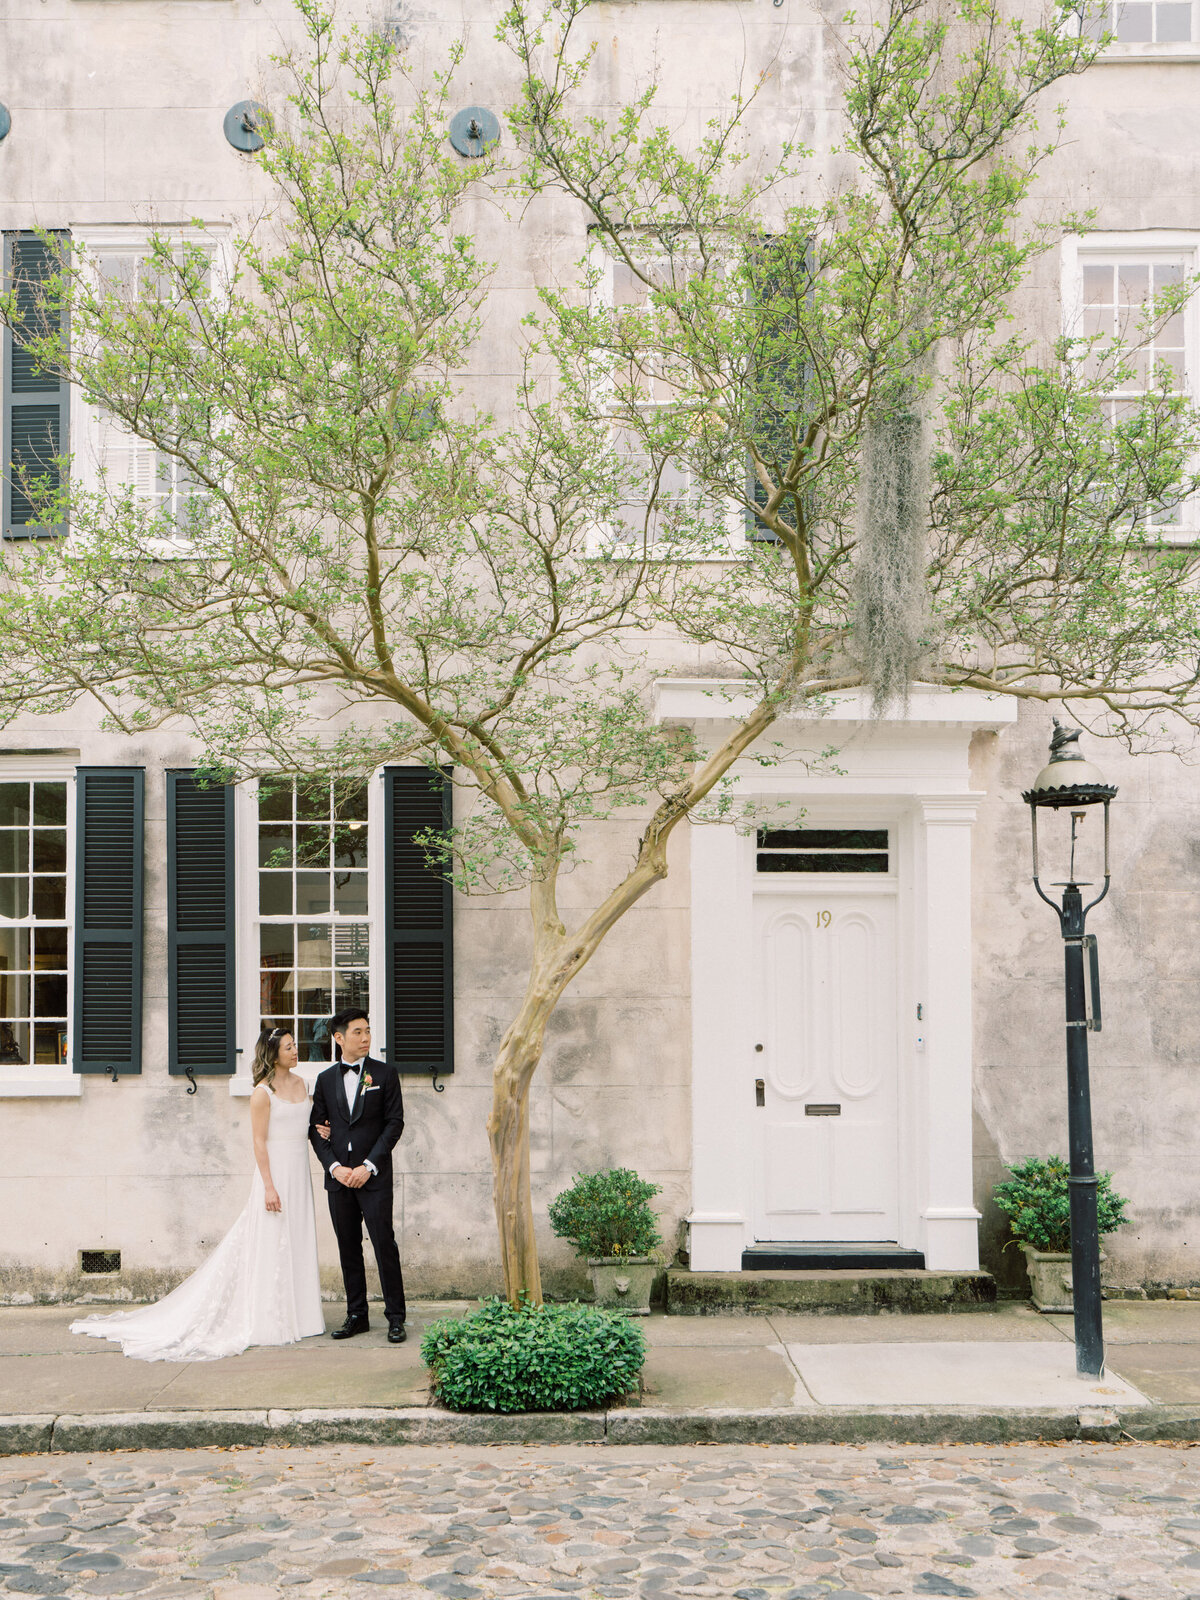 Cannon-Green-Wedding-in-charleston-photo-by-philip-casey-photography-051